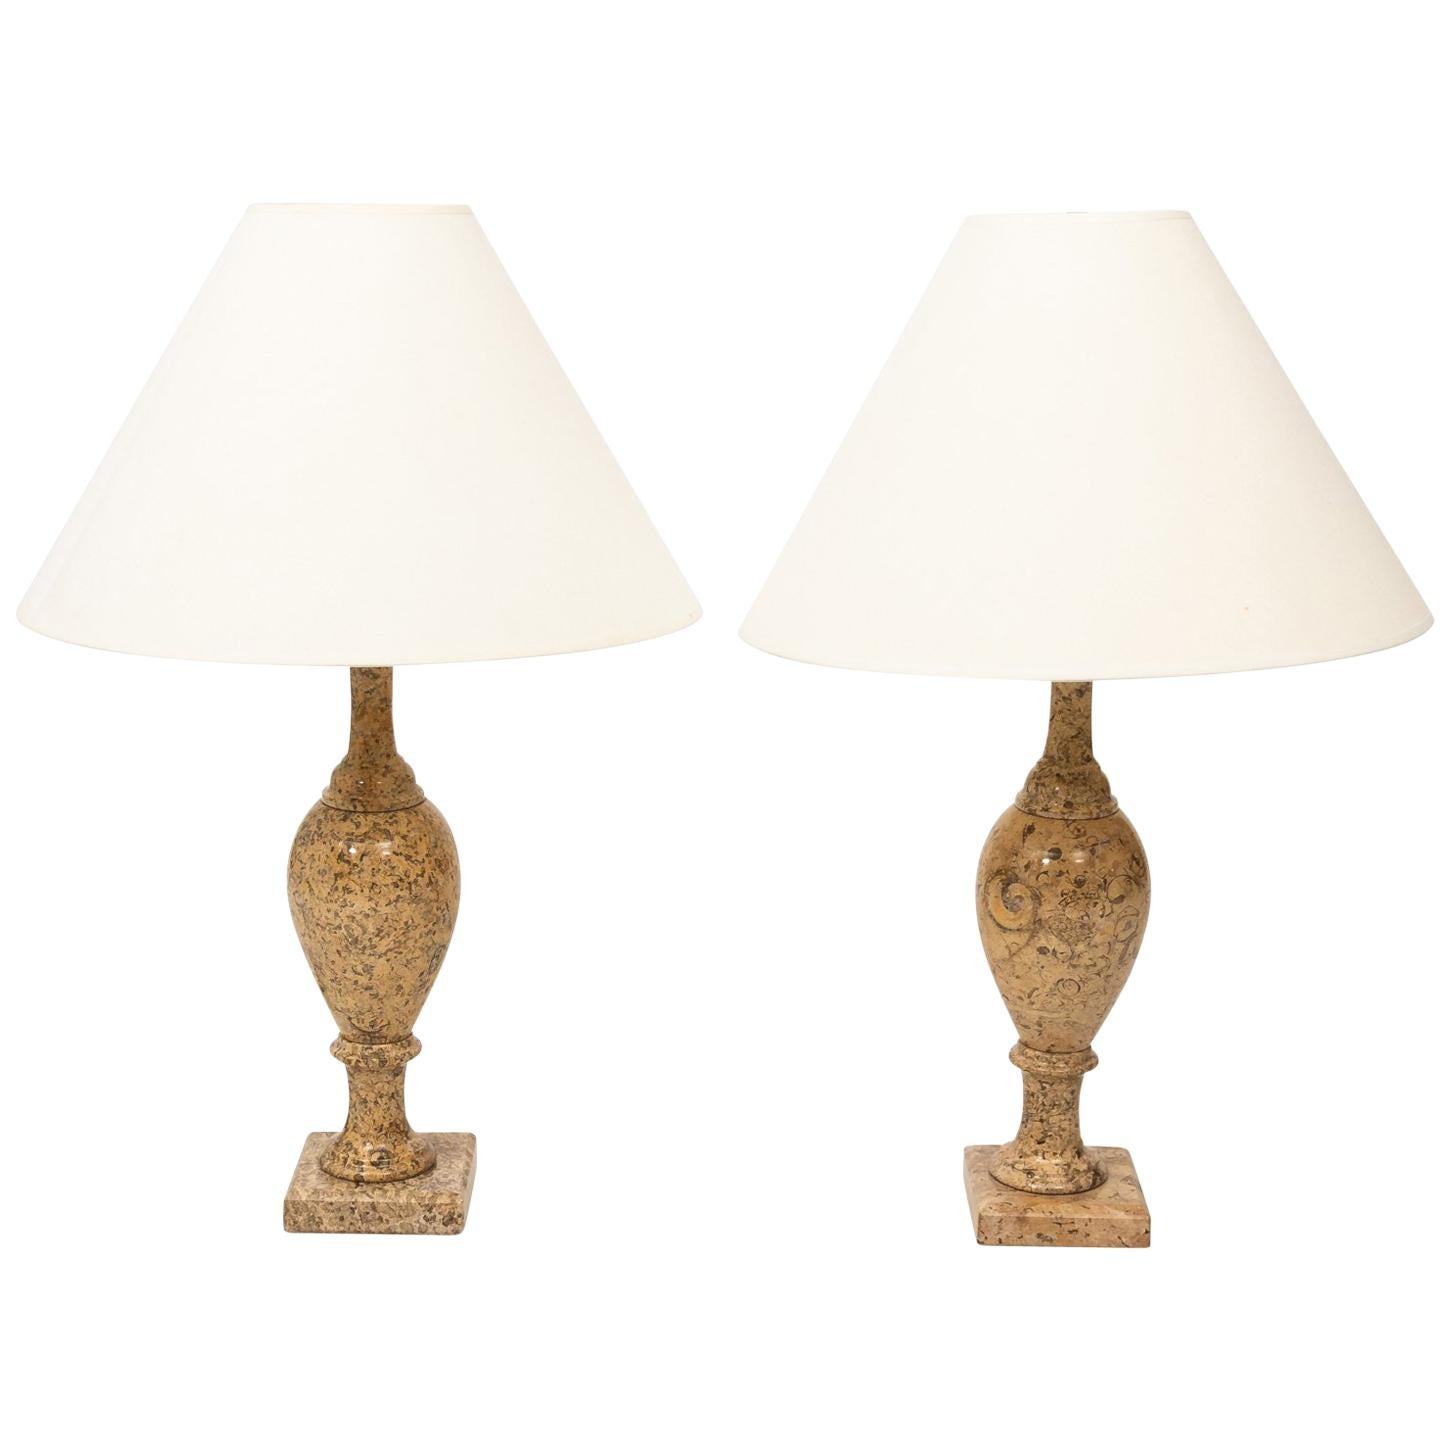 Pair of Polished Travertine Column Table Lamps